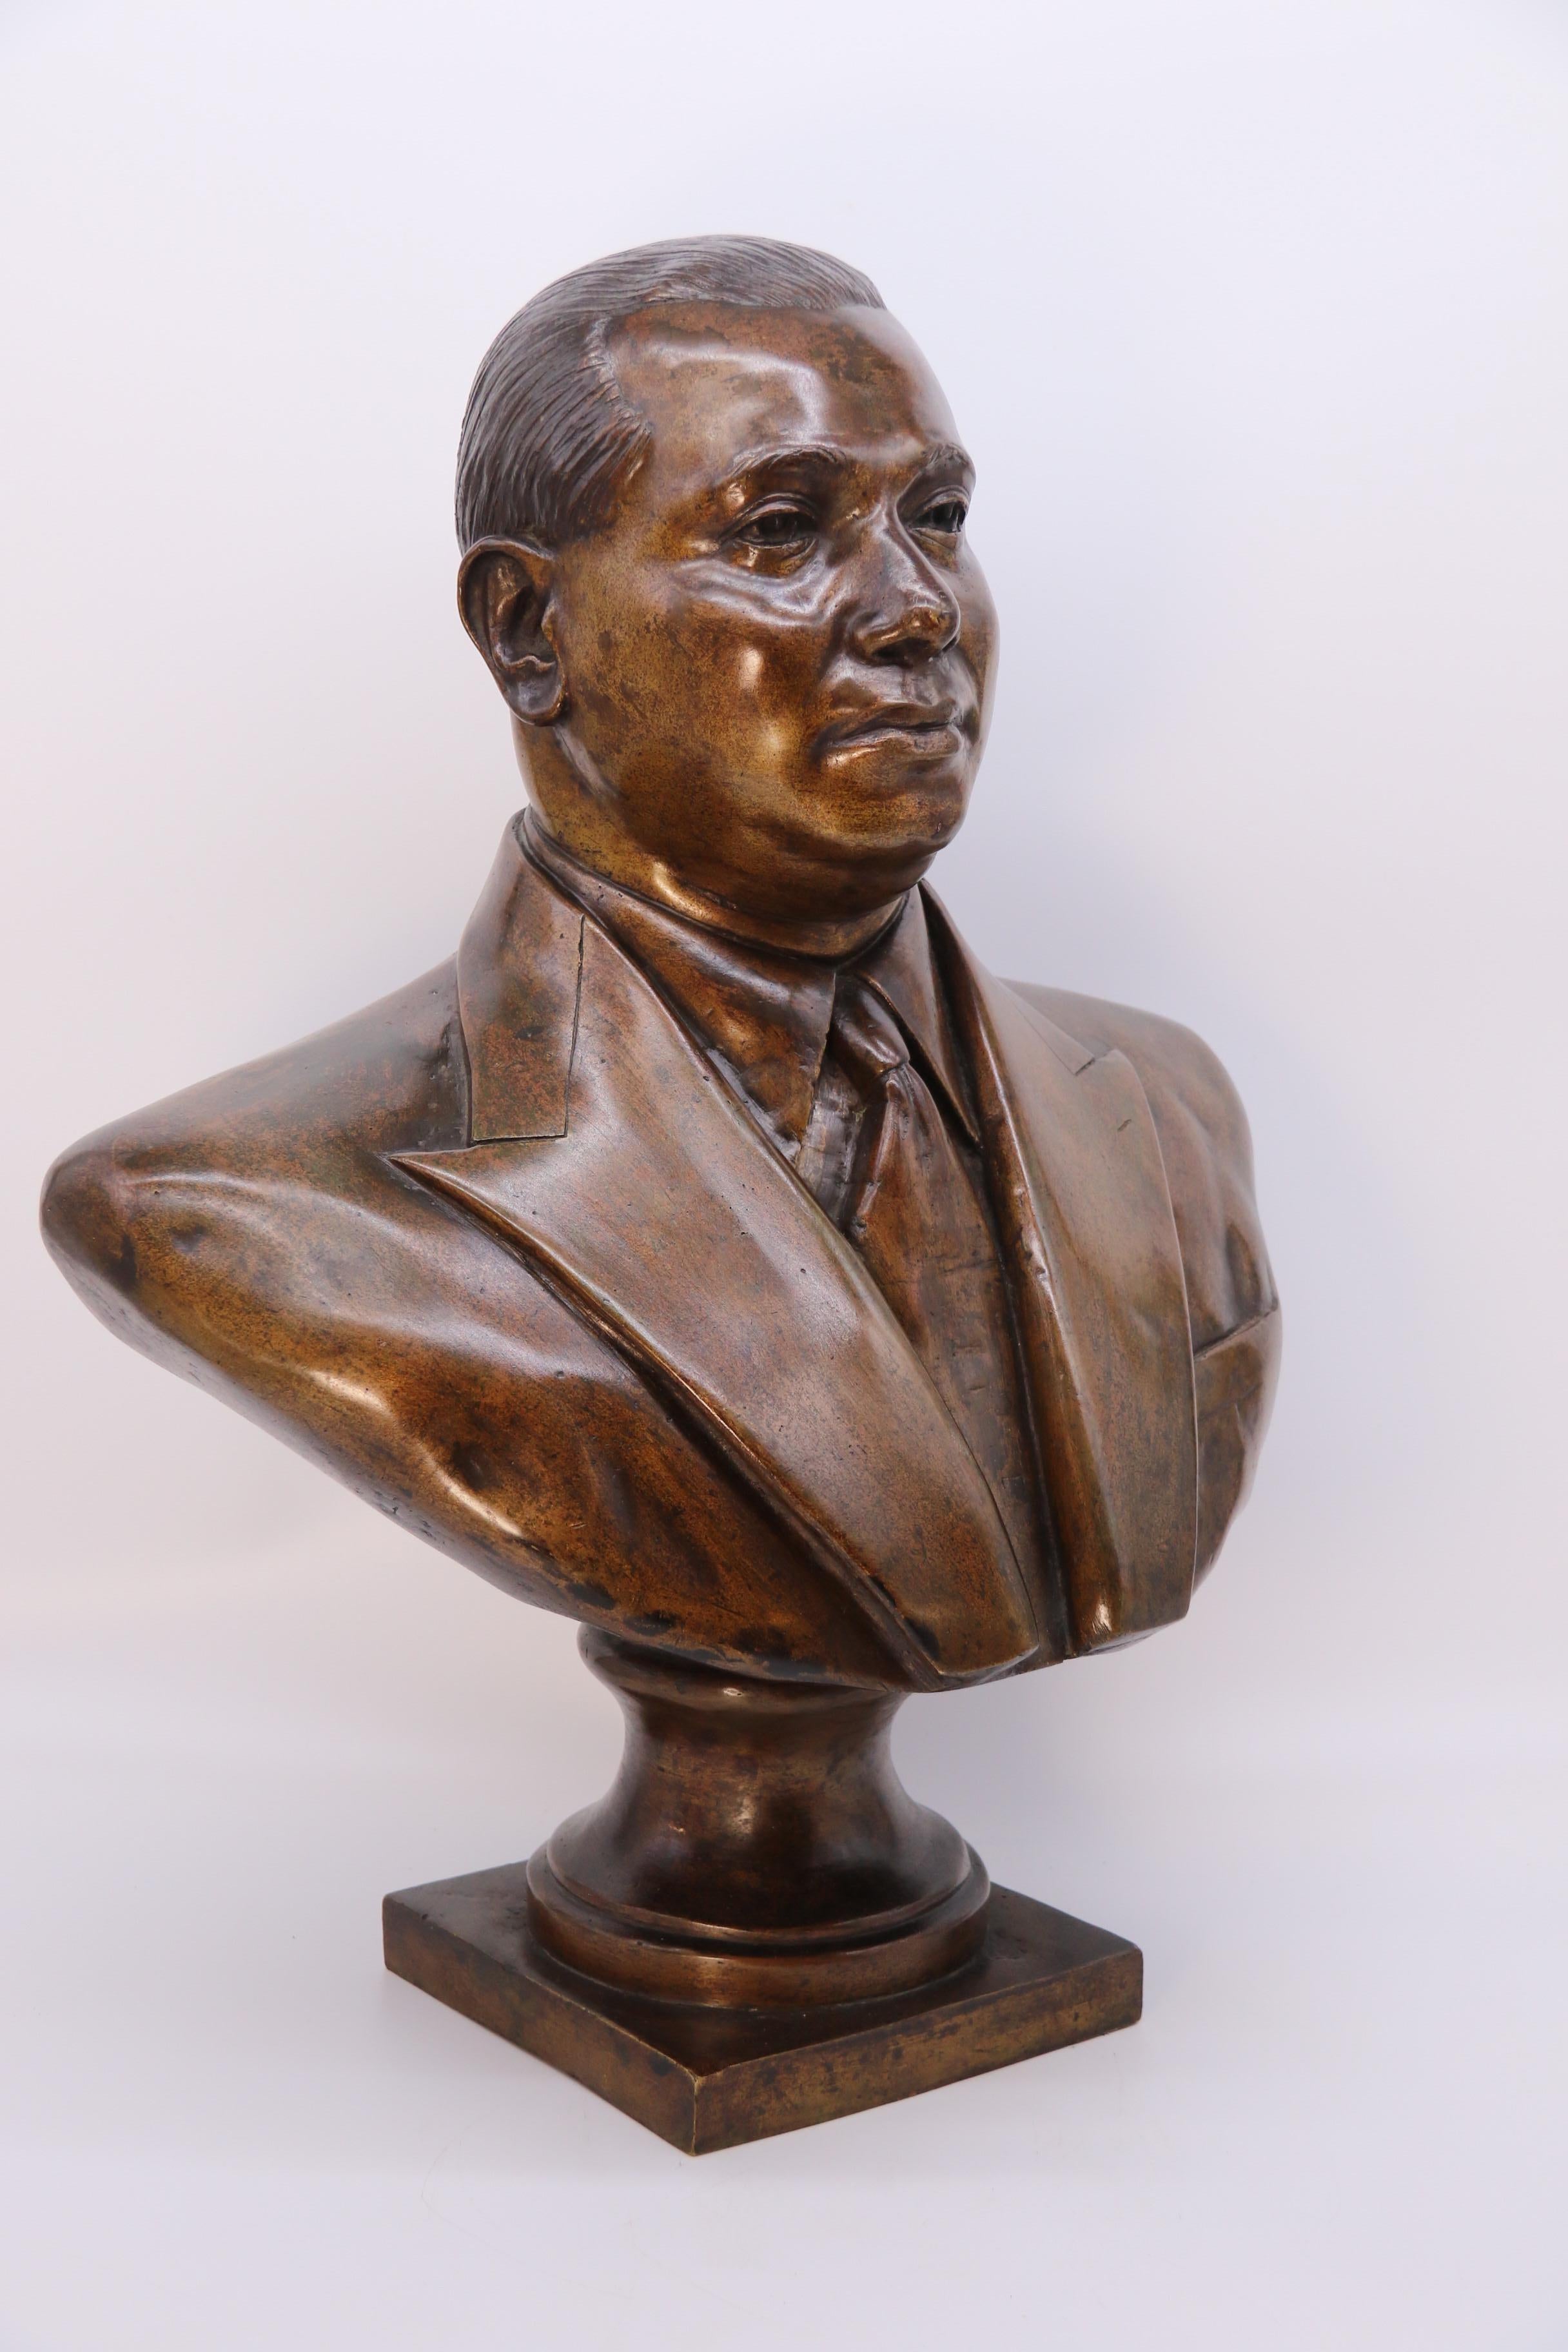 This most unusual almost life sized heavily cast bronze bust depicts a very smart most likely South American gentleman dressed in a double breasted suit jacket with a shirt and tie. He is a relatively young man with strong handsome features and a